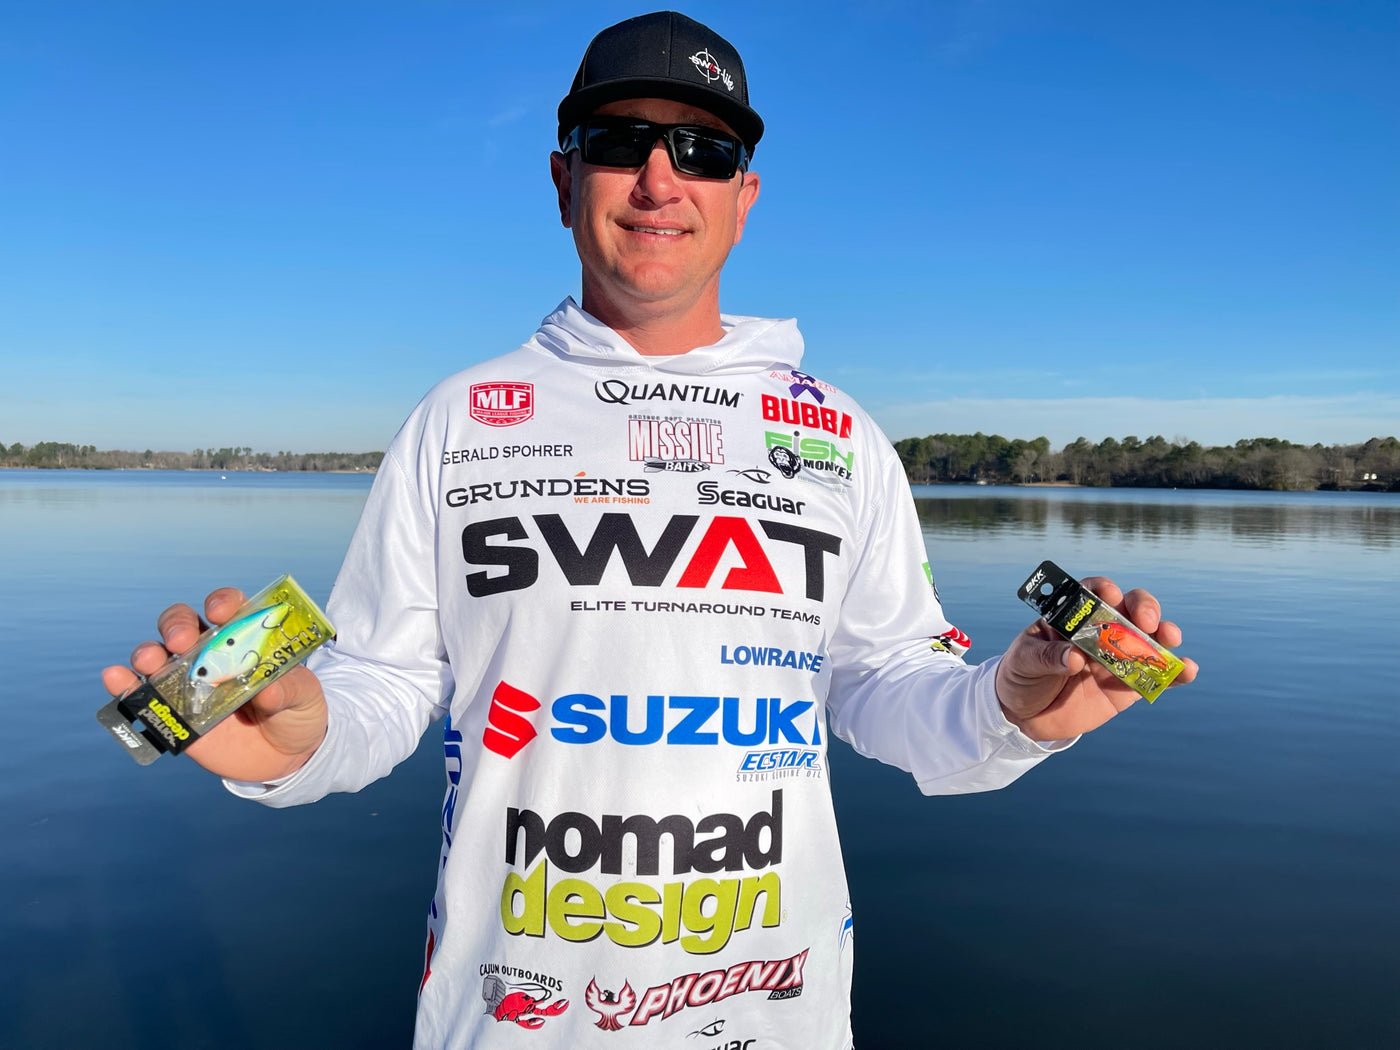 MLF Pro Gerald Spohrer Takes Second Place on First Day